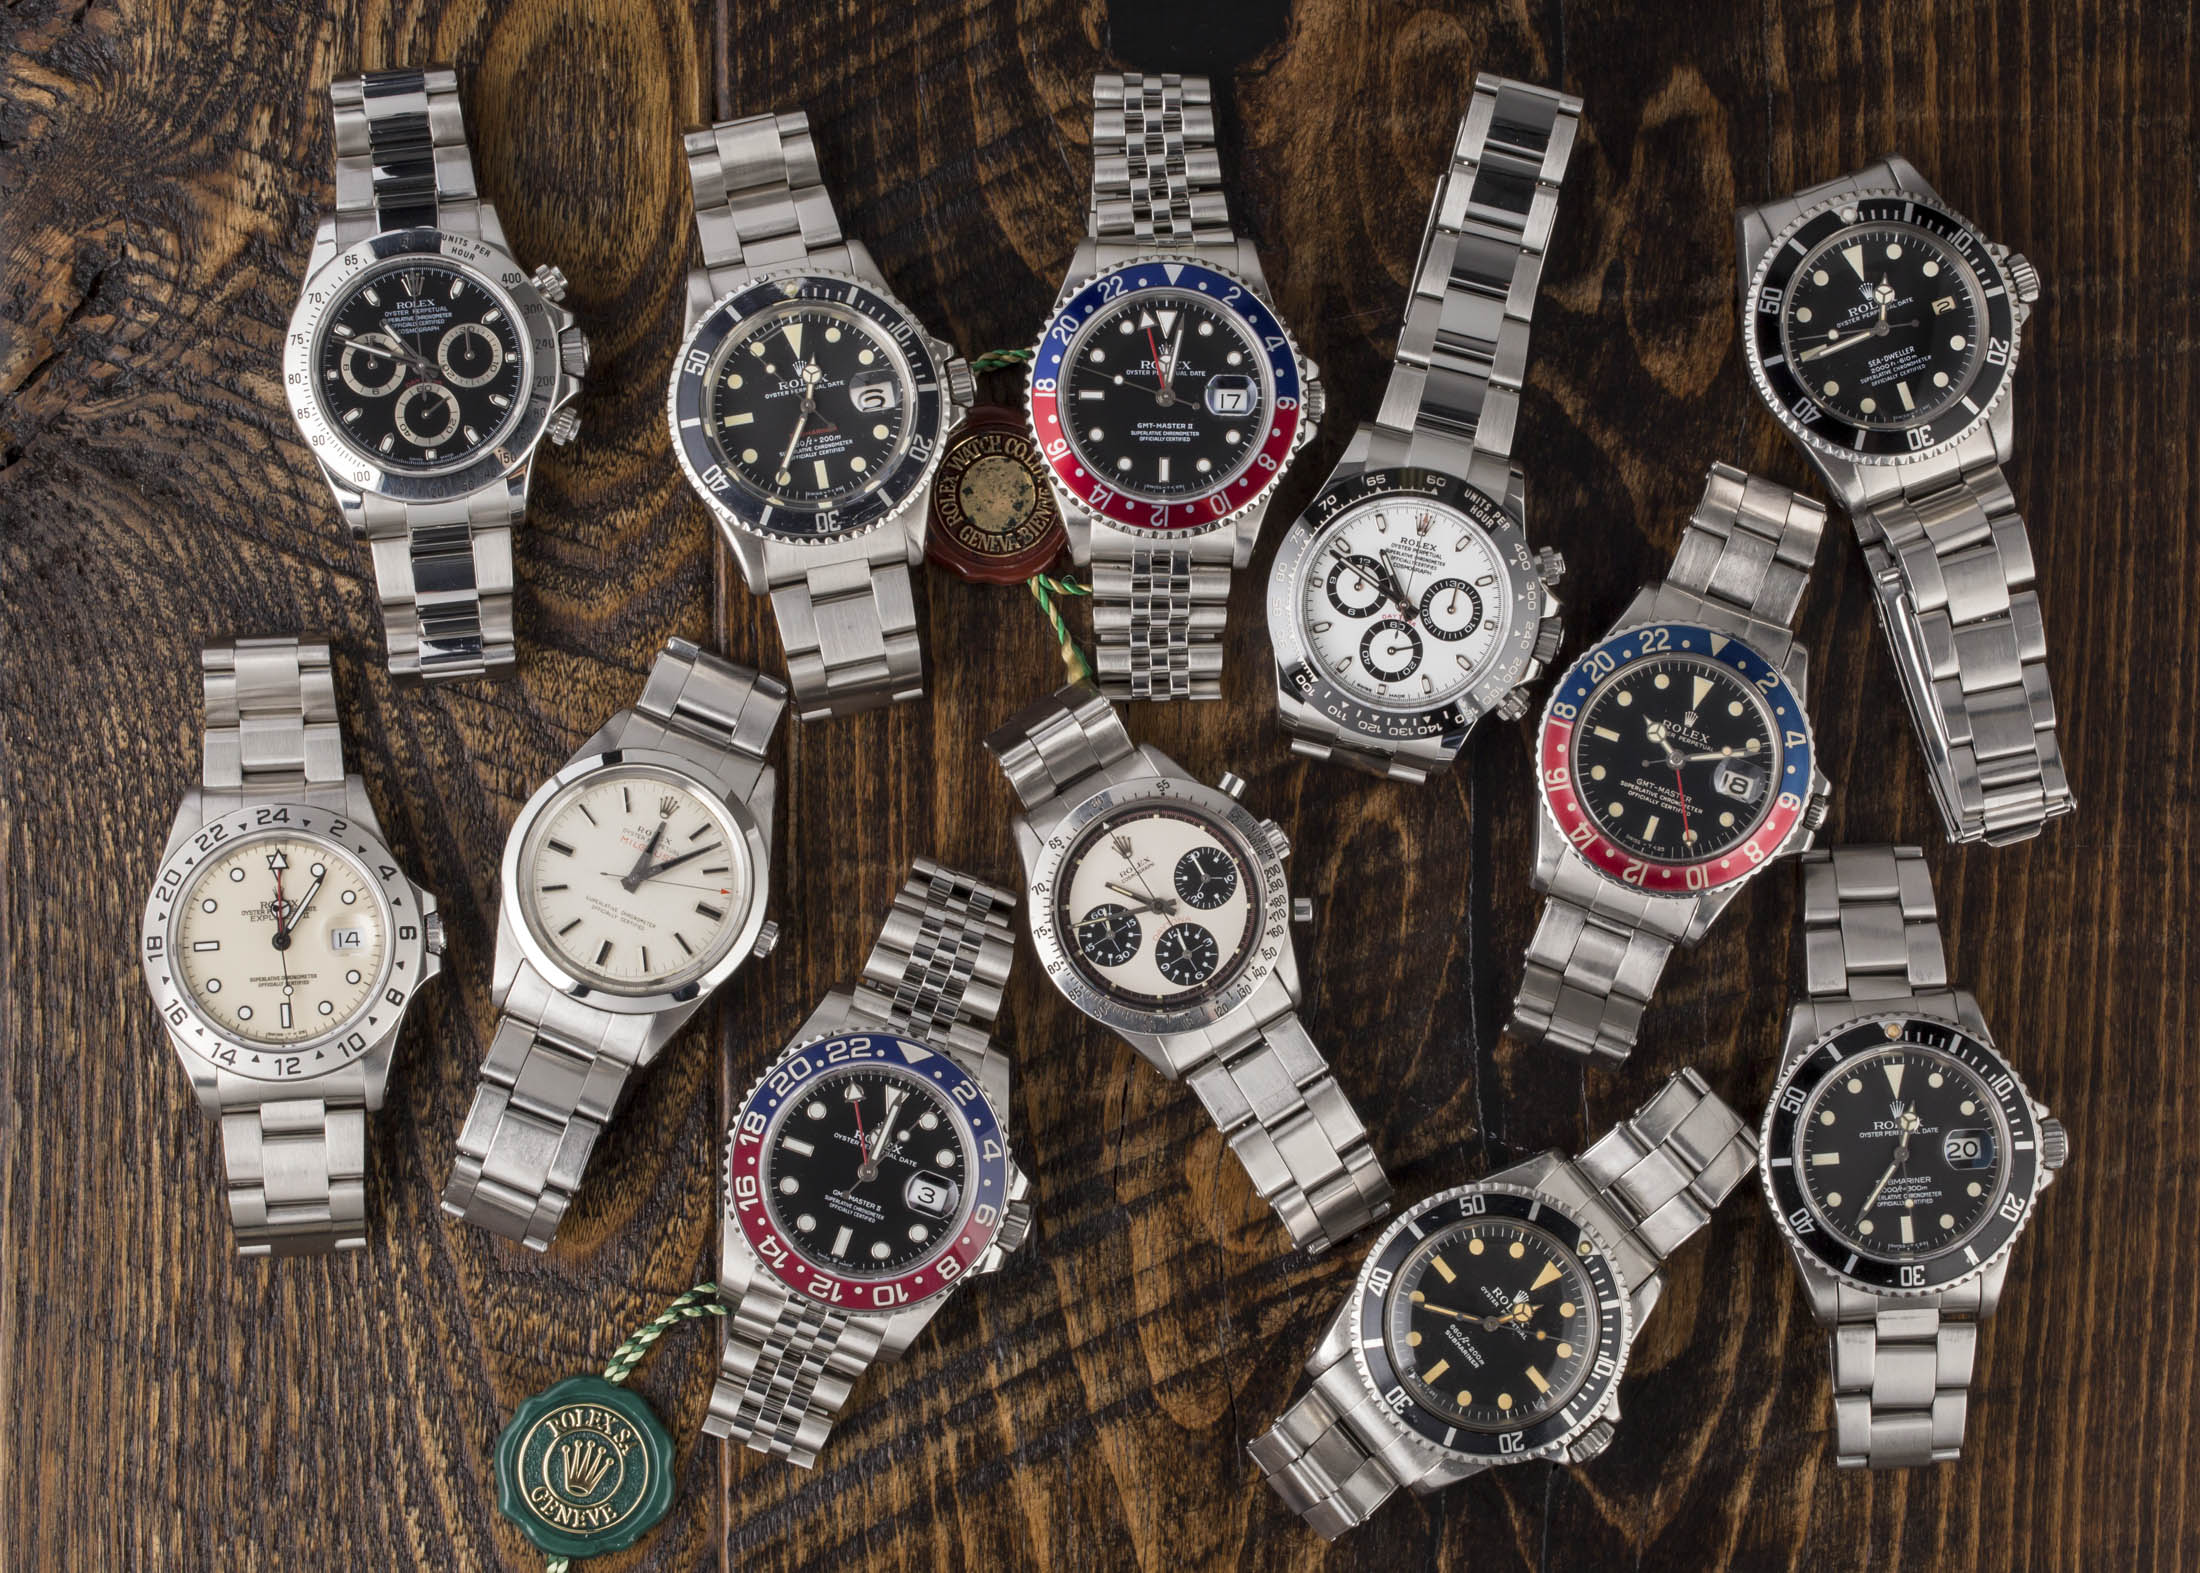 ROLEX GMT-MASTER 'FLYING ACROSS THE TIME ZONES' LUEL MAGAZINE SEPT